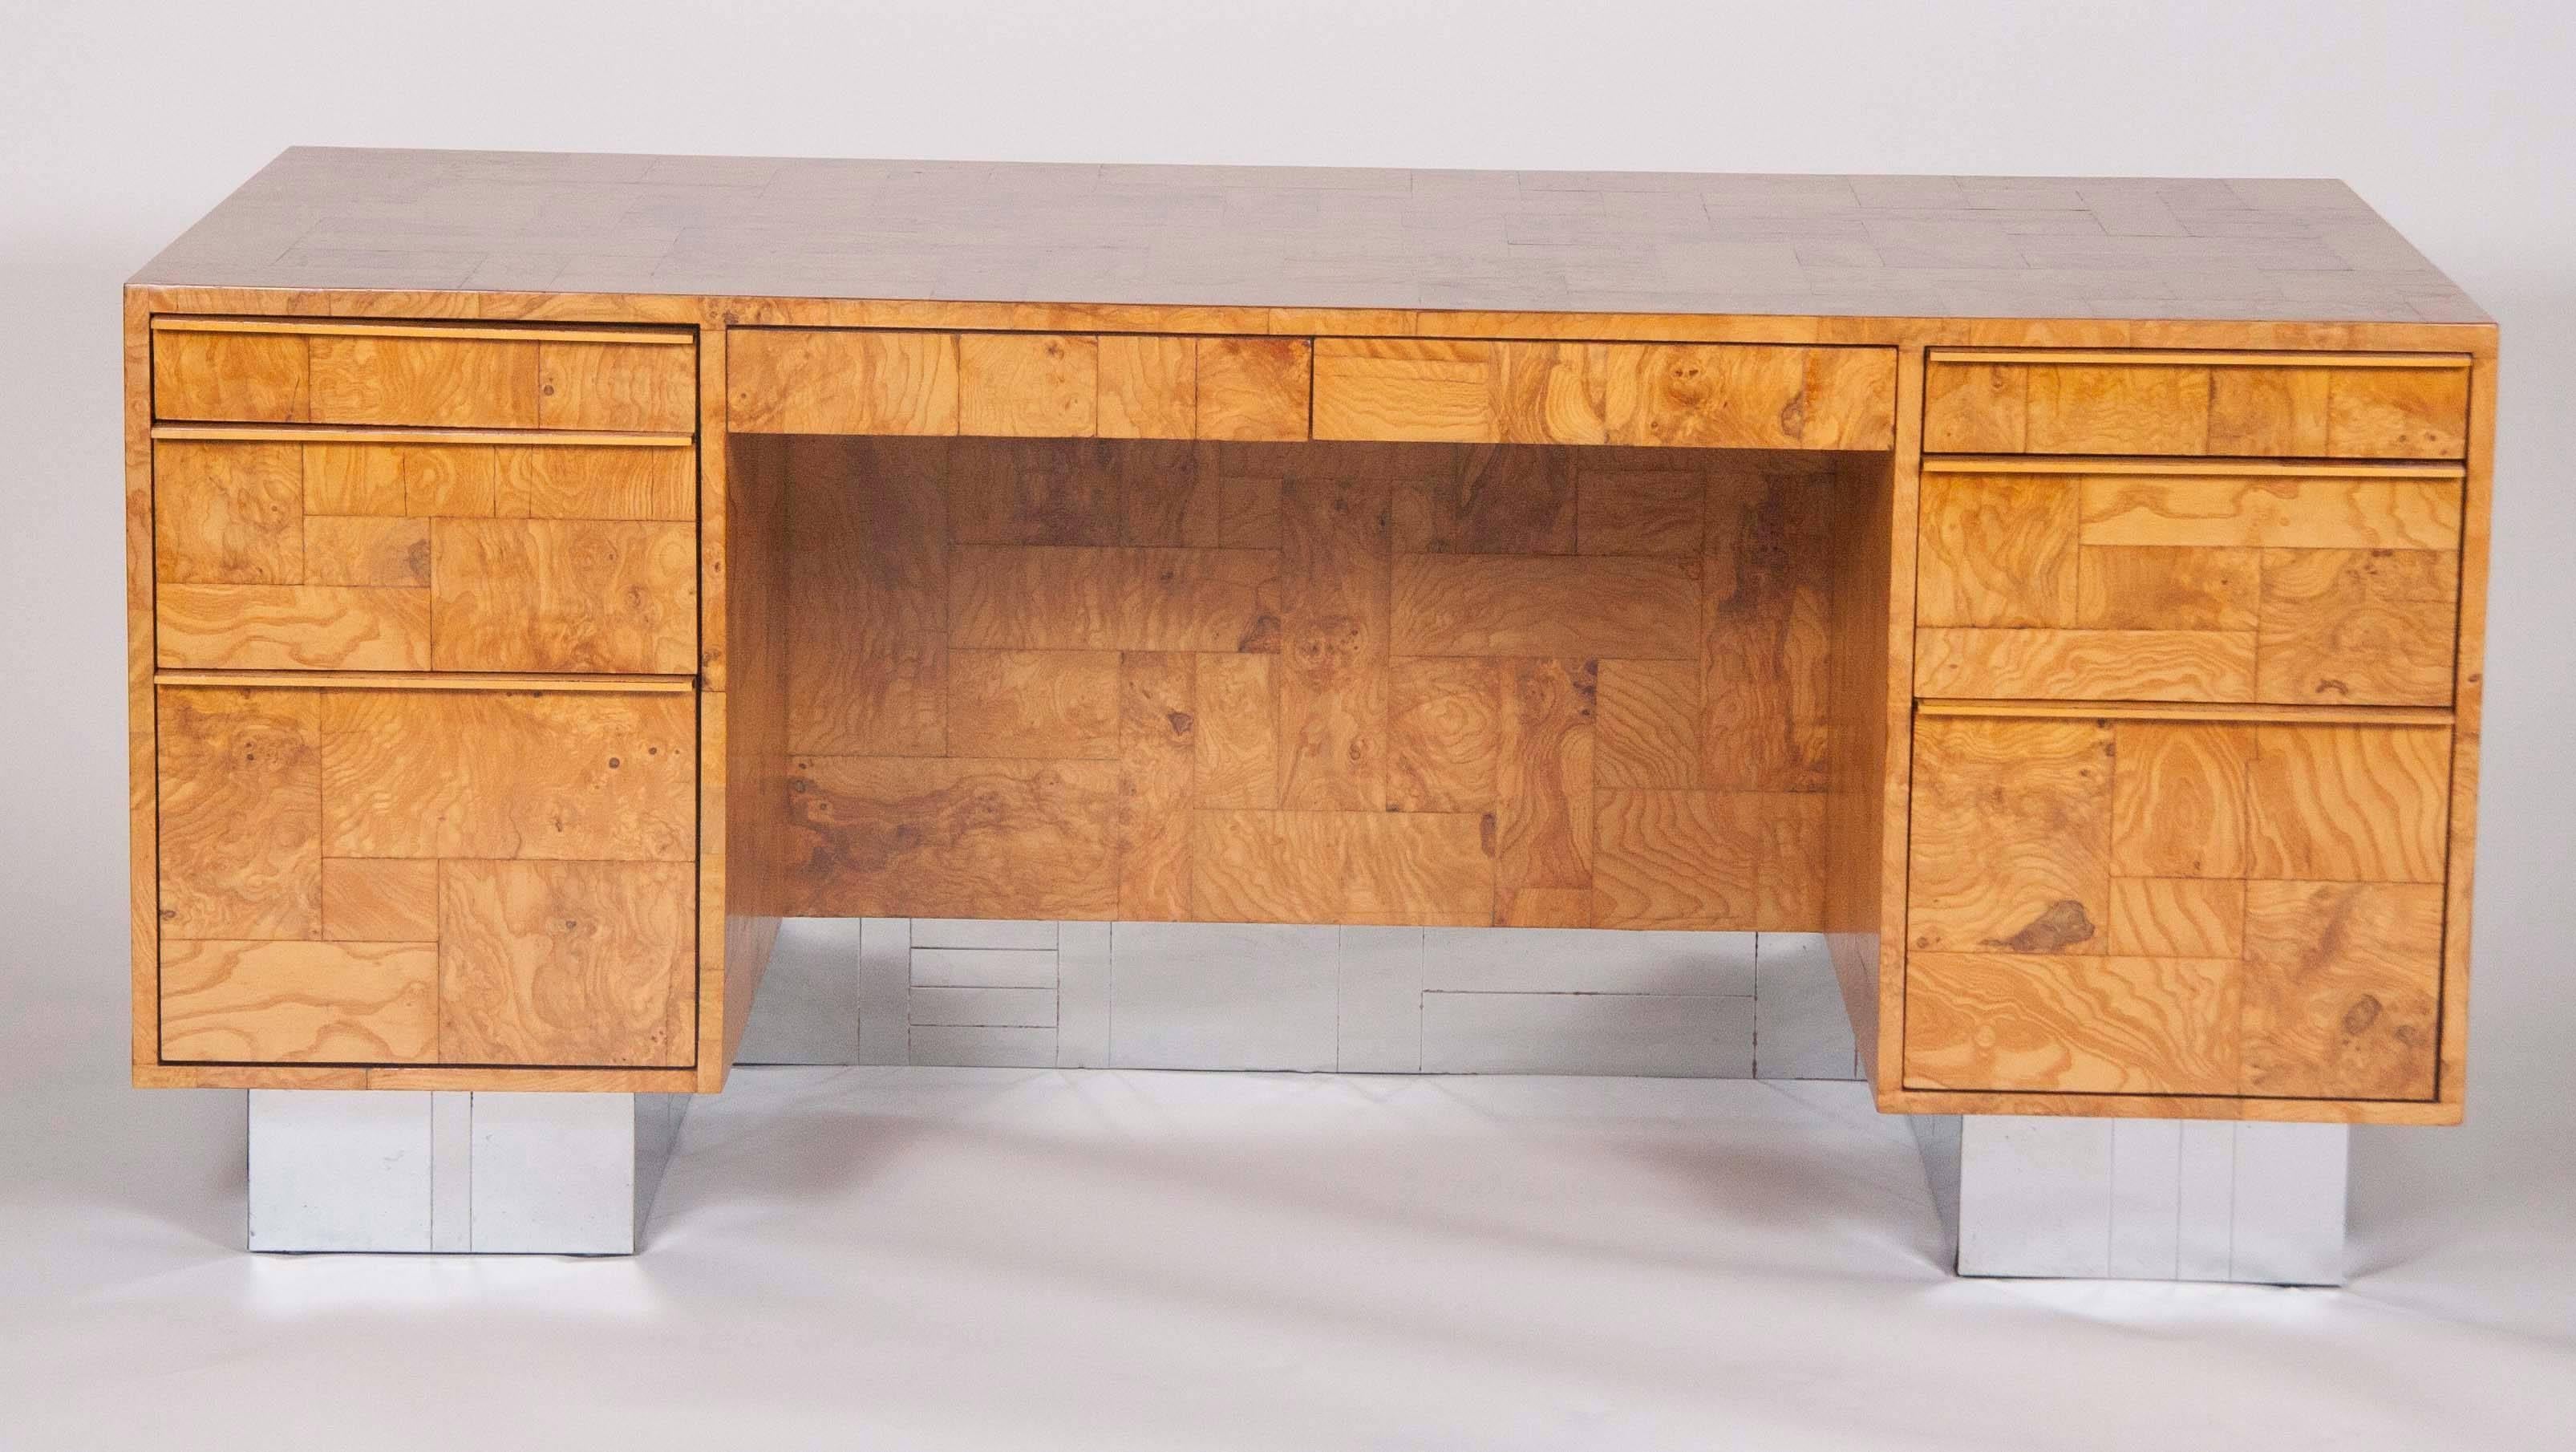 A signed olivewood veneer desk rising from a metal tiled cityscape base. This desk was designed by repute specifically for a customer by Paul Evans, circa 1978.